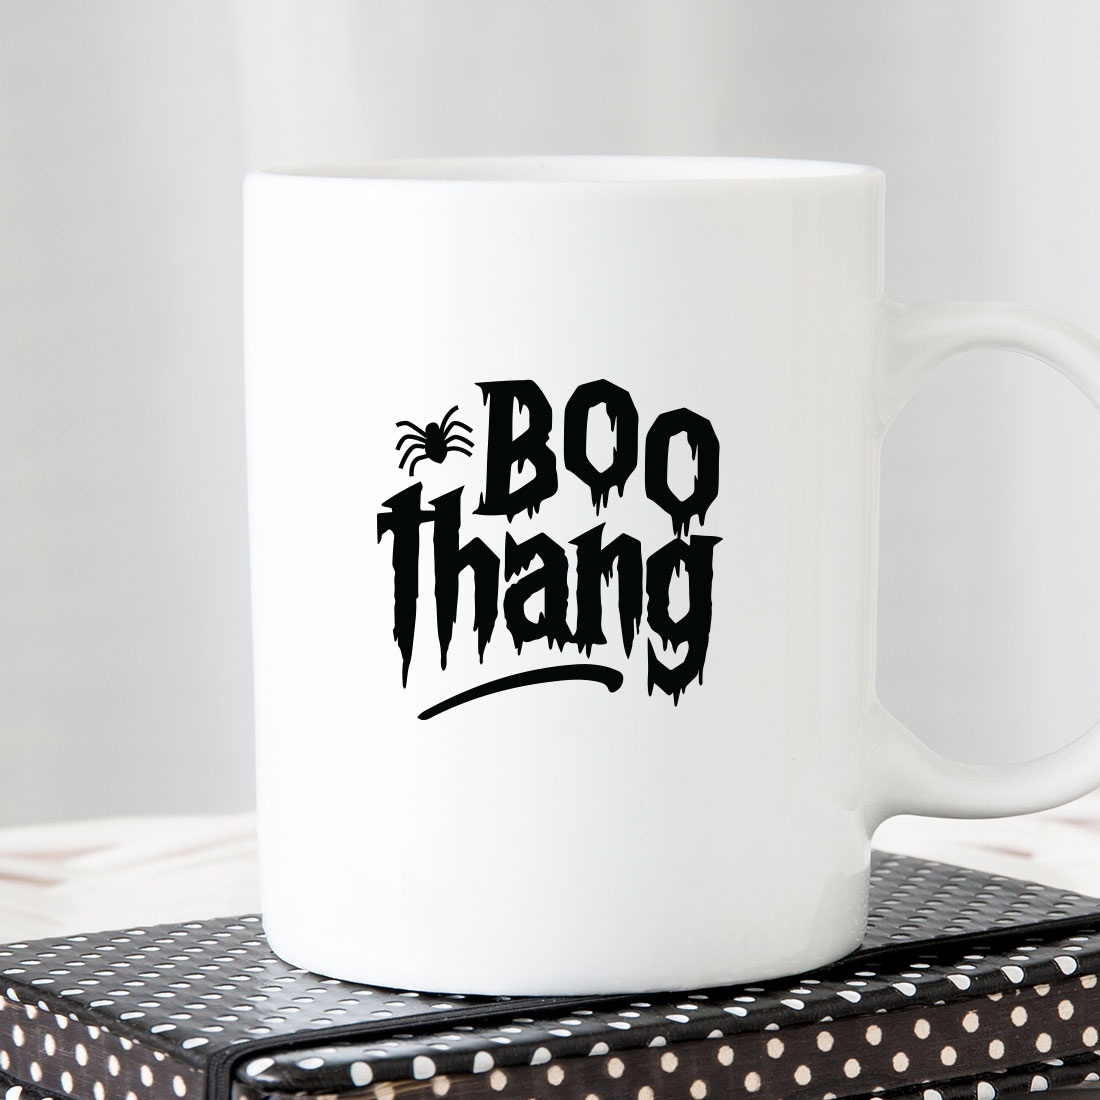 White coffee mug with the words boo thang printed on it.